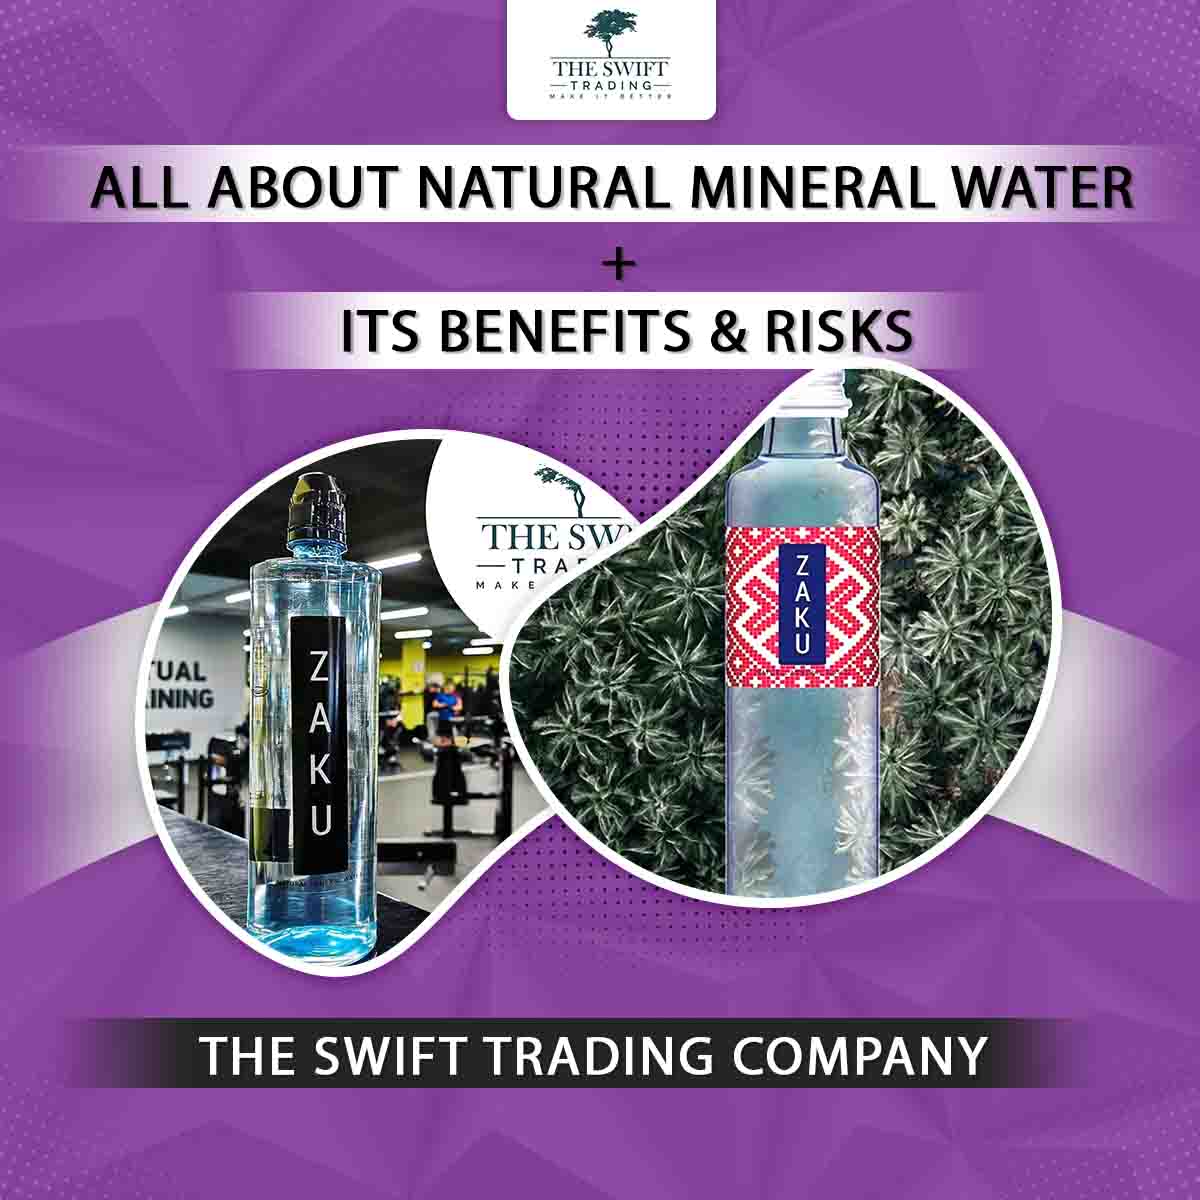 All About Natural Mineral Water + Its Benefits & Risks